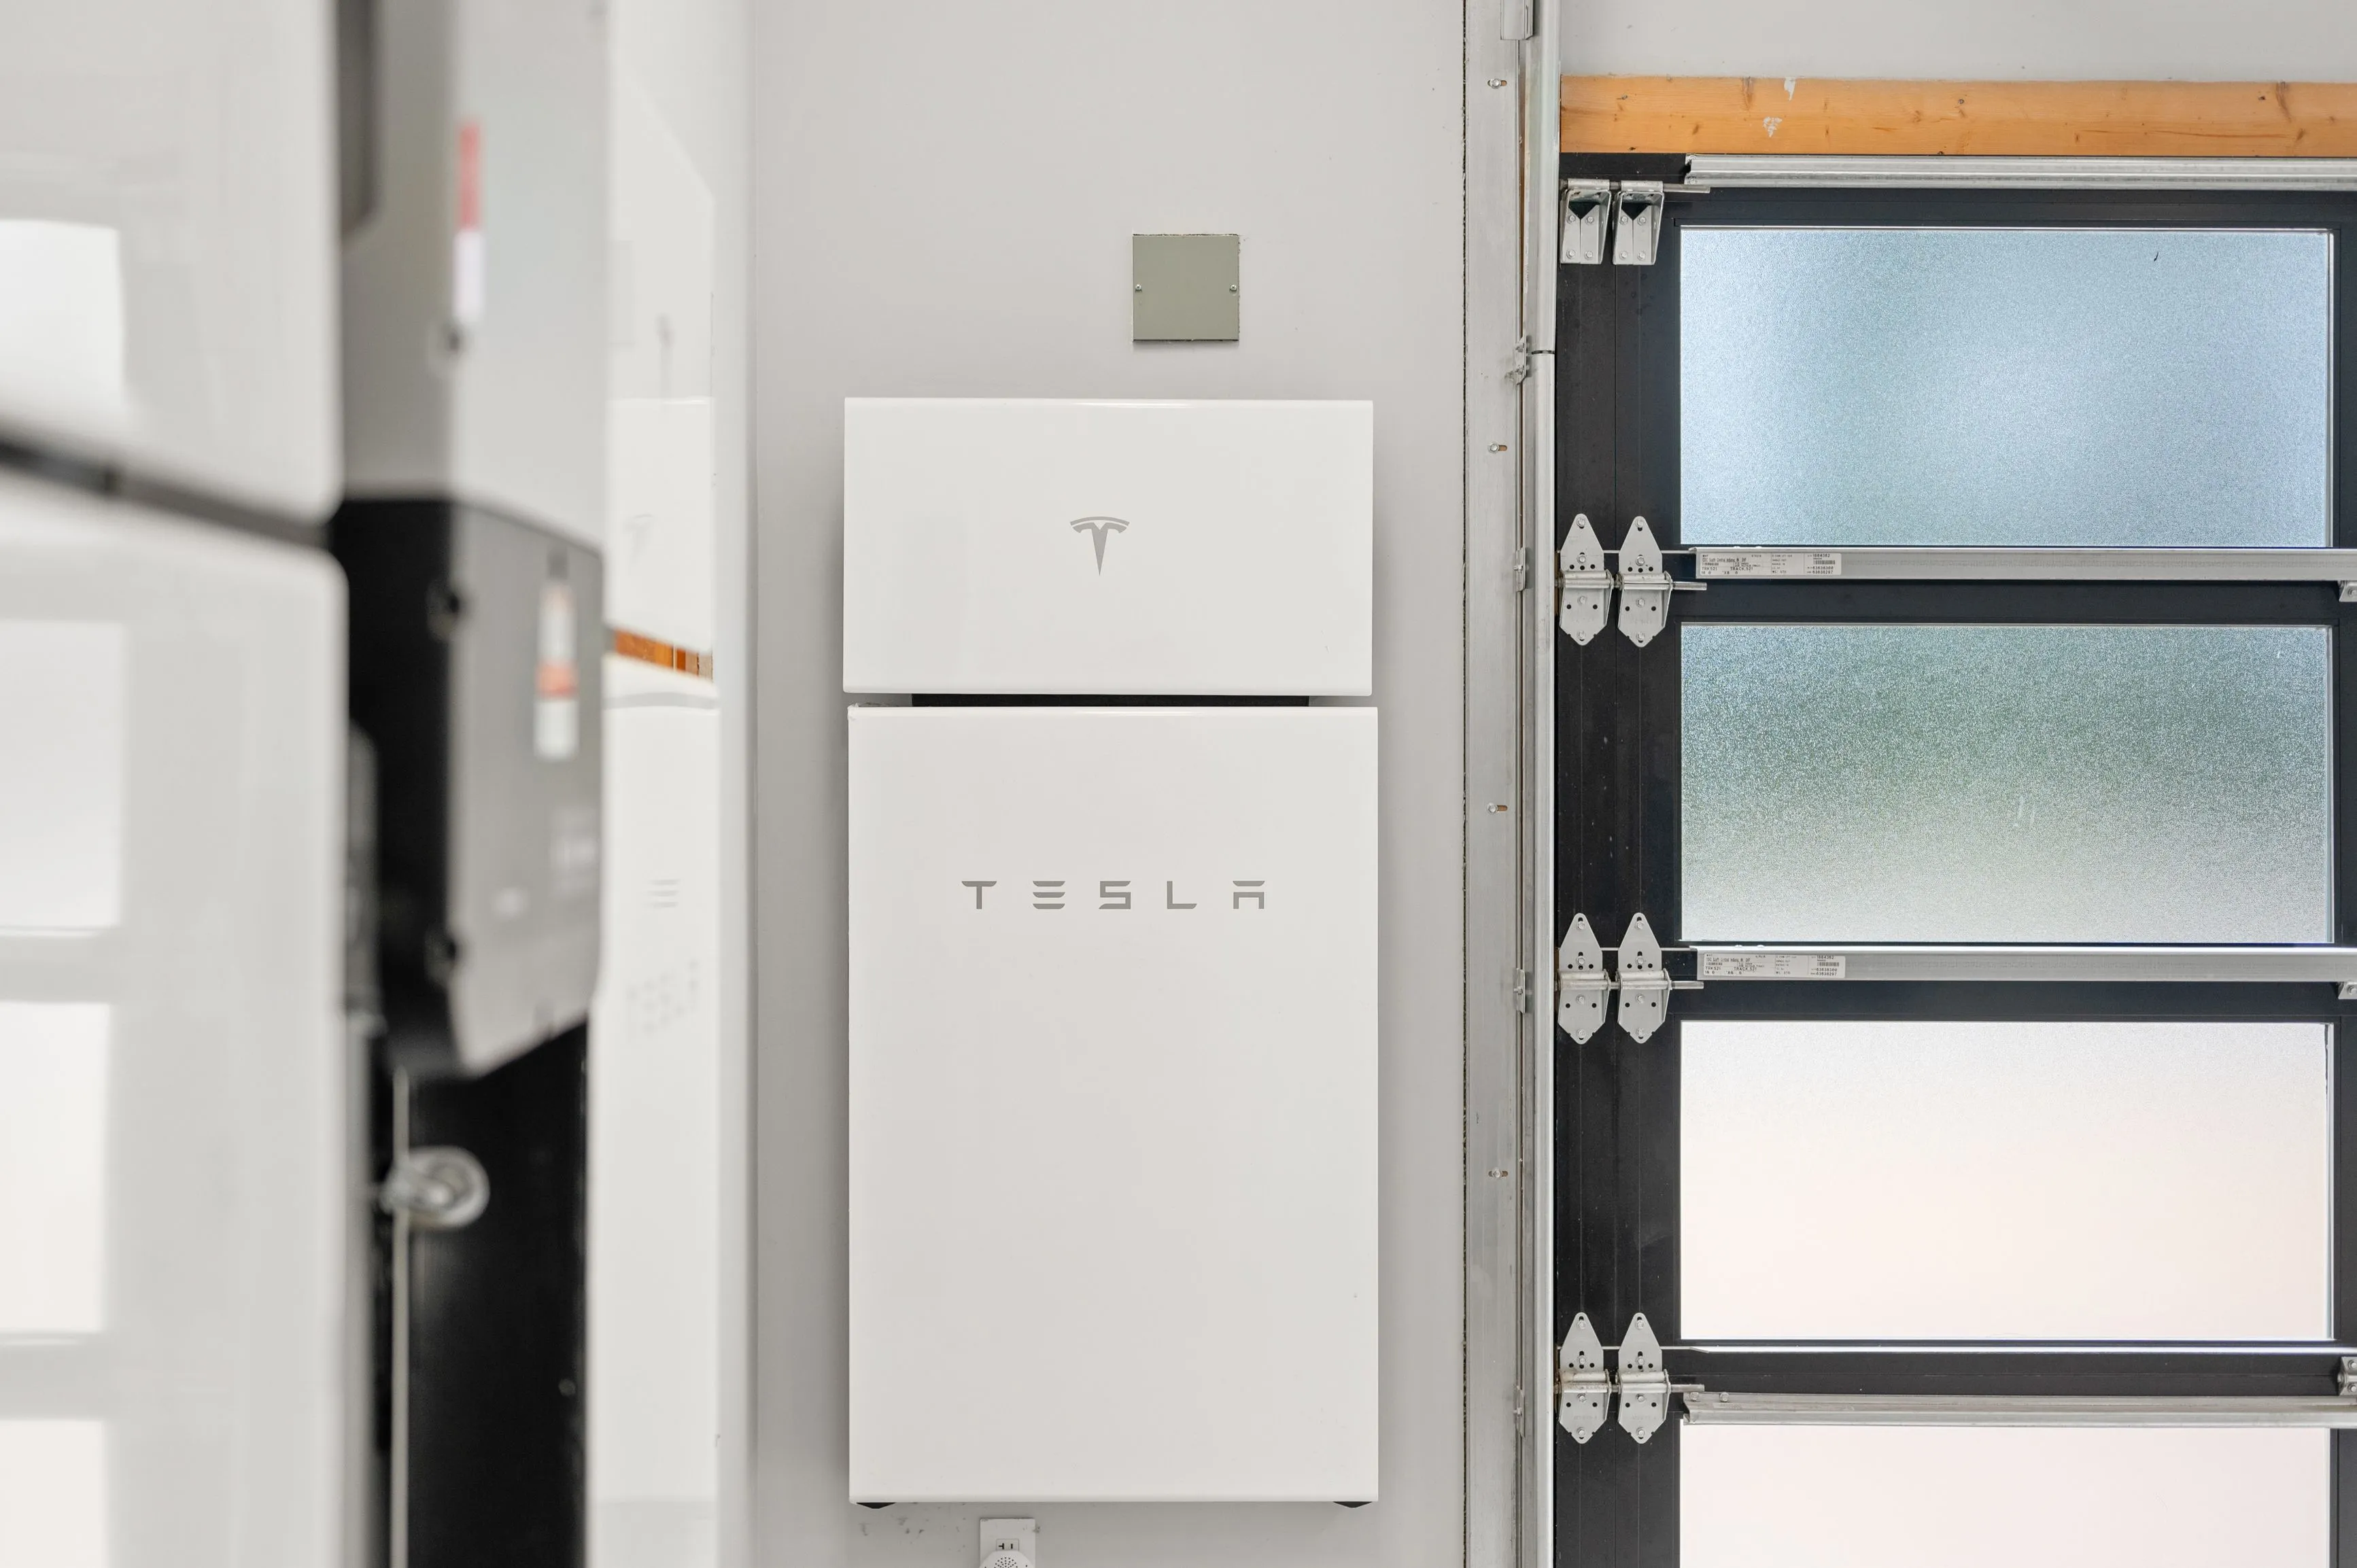 Tesla Powerwall battery storage unit mounted on a wall next to frosted glass windows in a modern home's utility area.